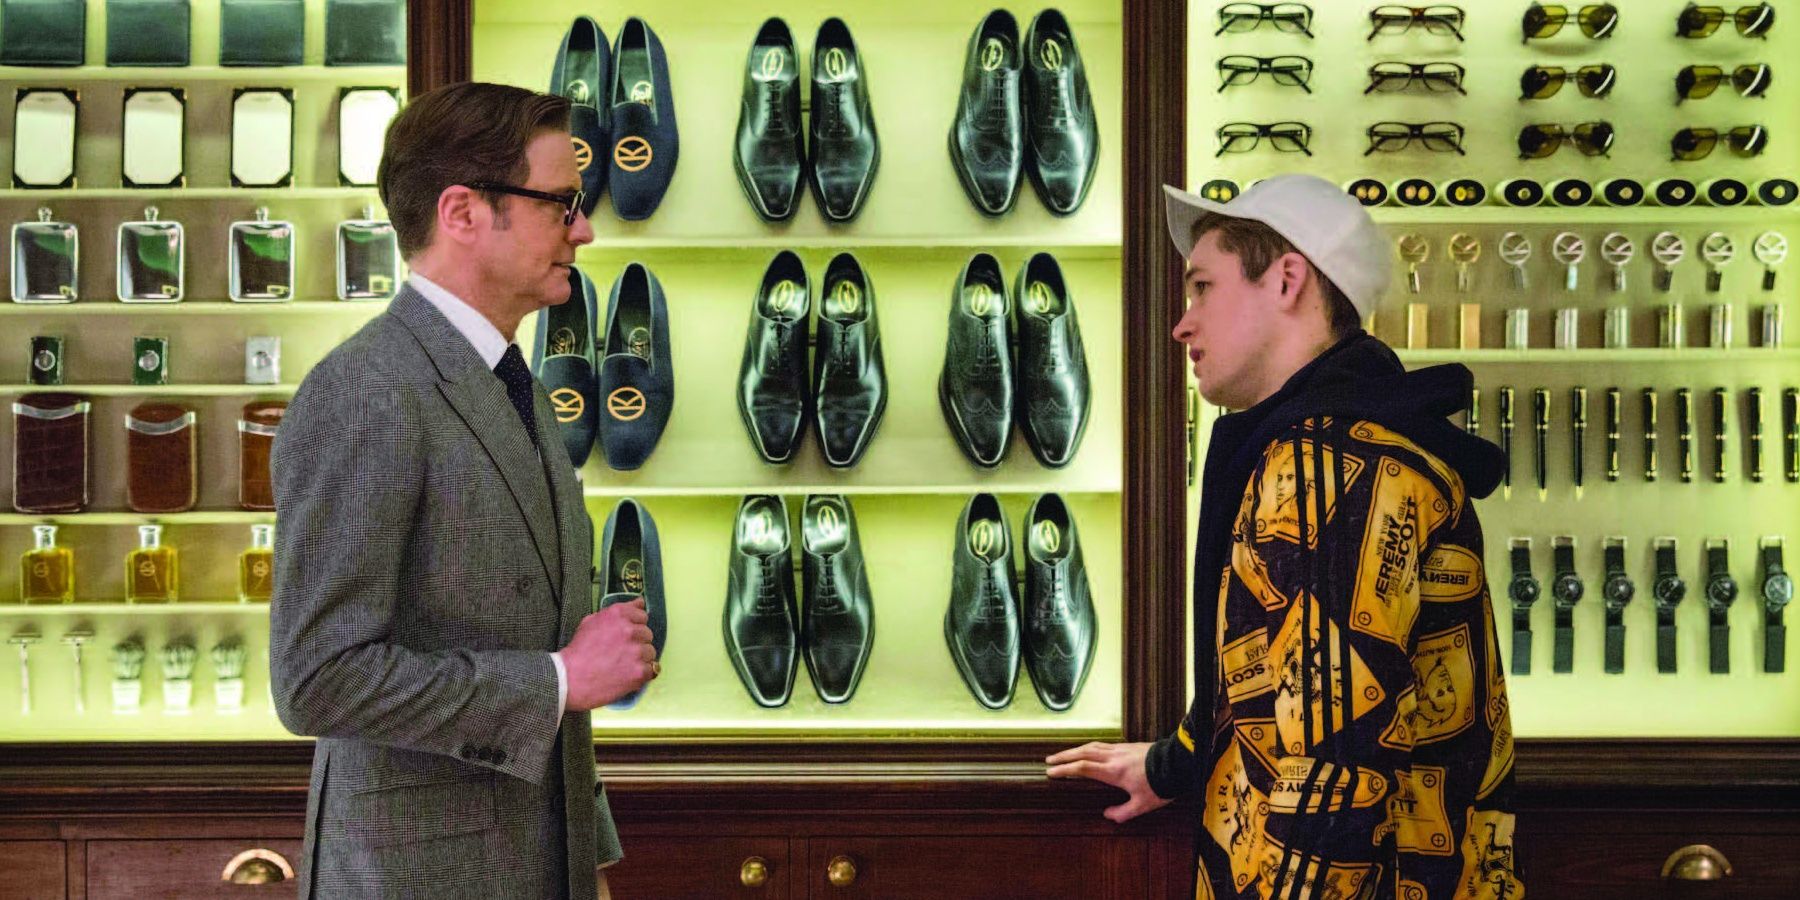 Harry talking to Eggsy in the tailor shop in Kingsman: The Secret Service